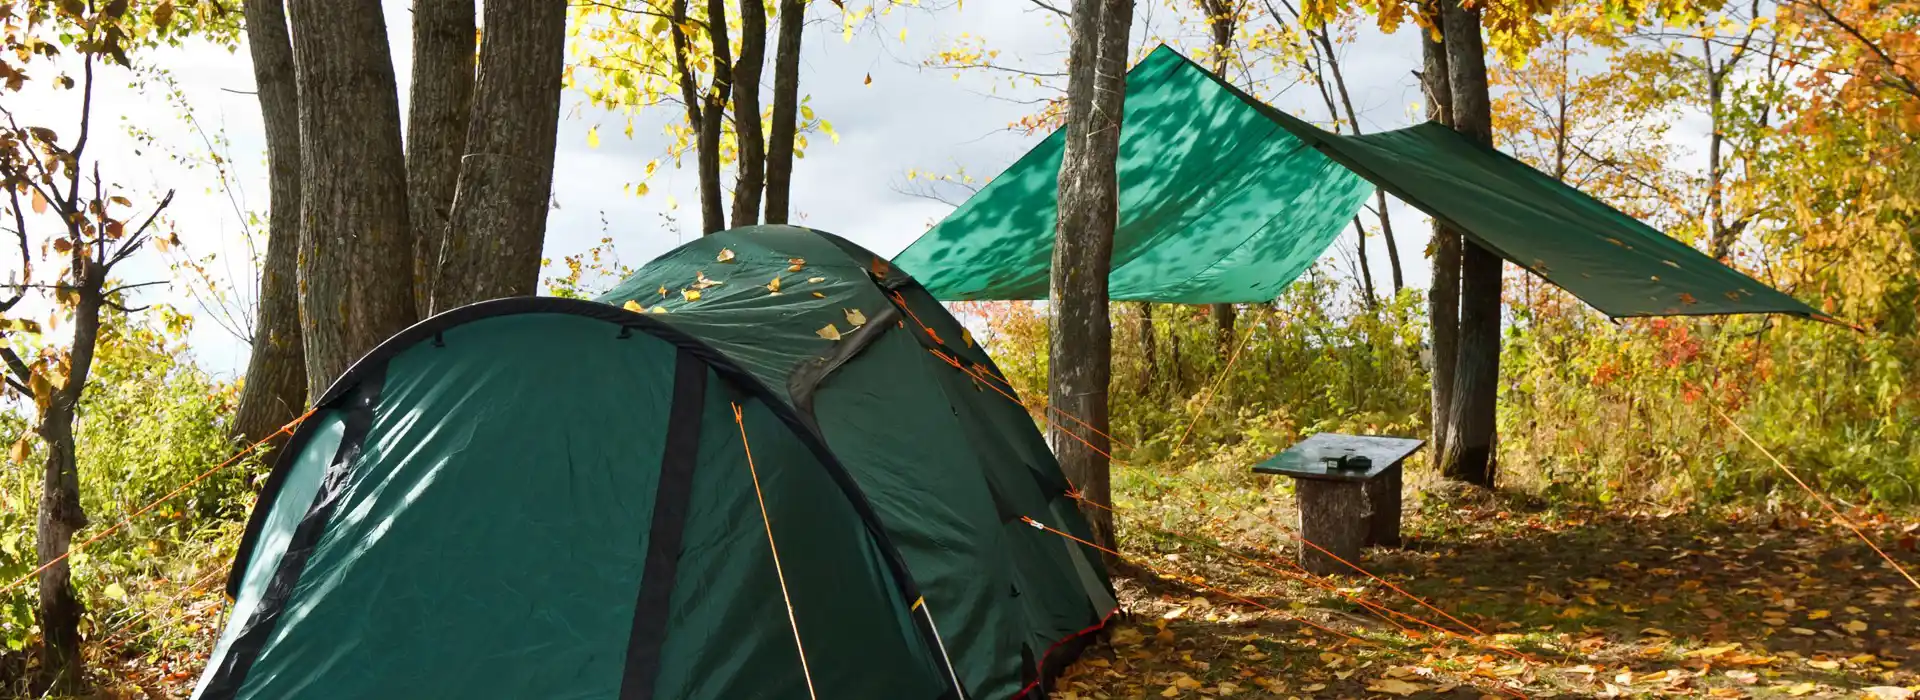 All year round campsites near me 